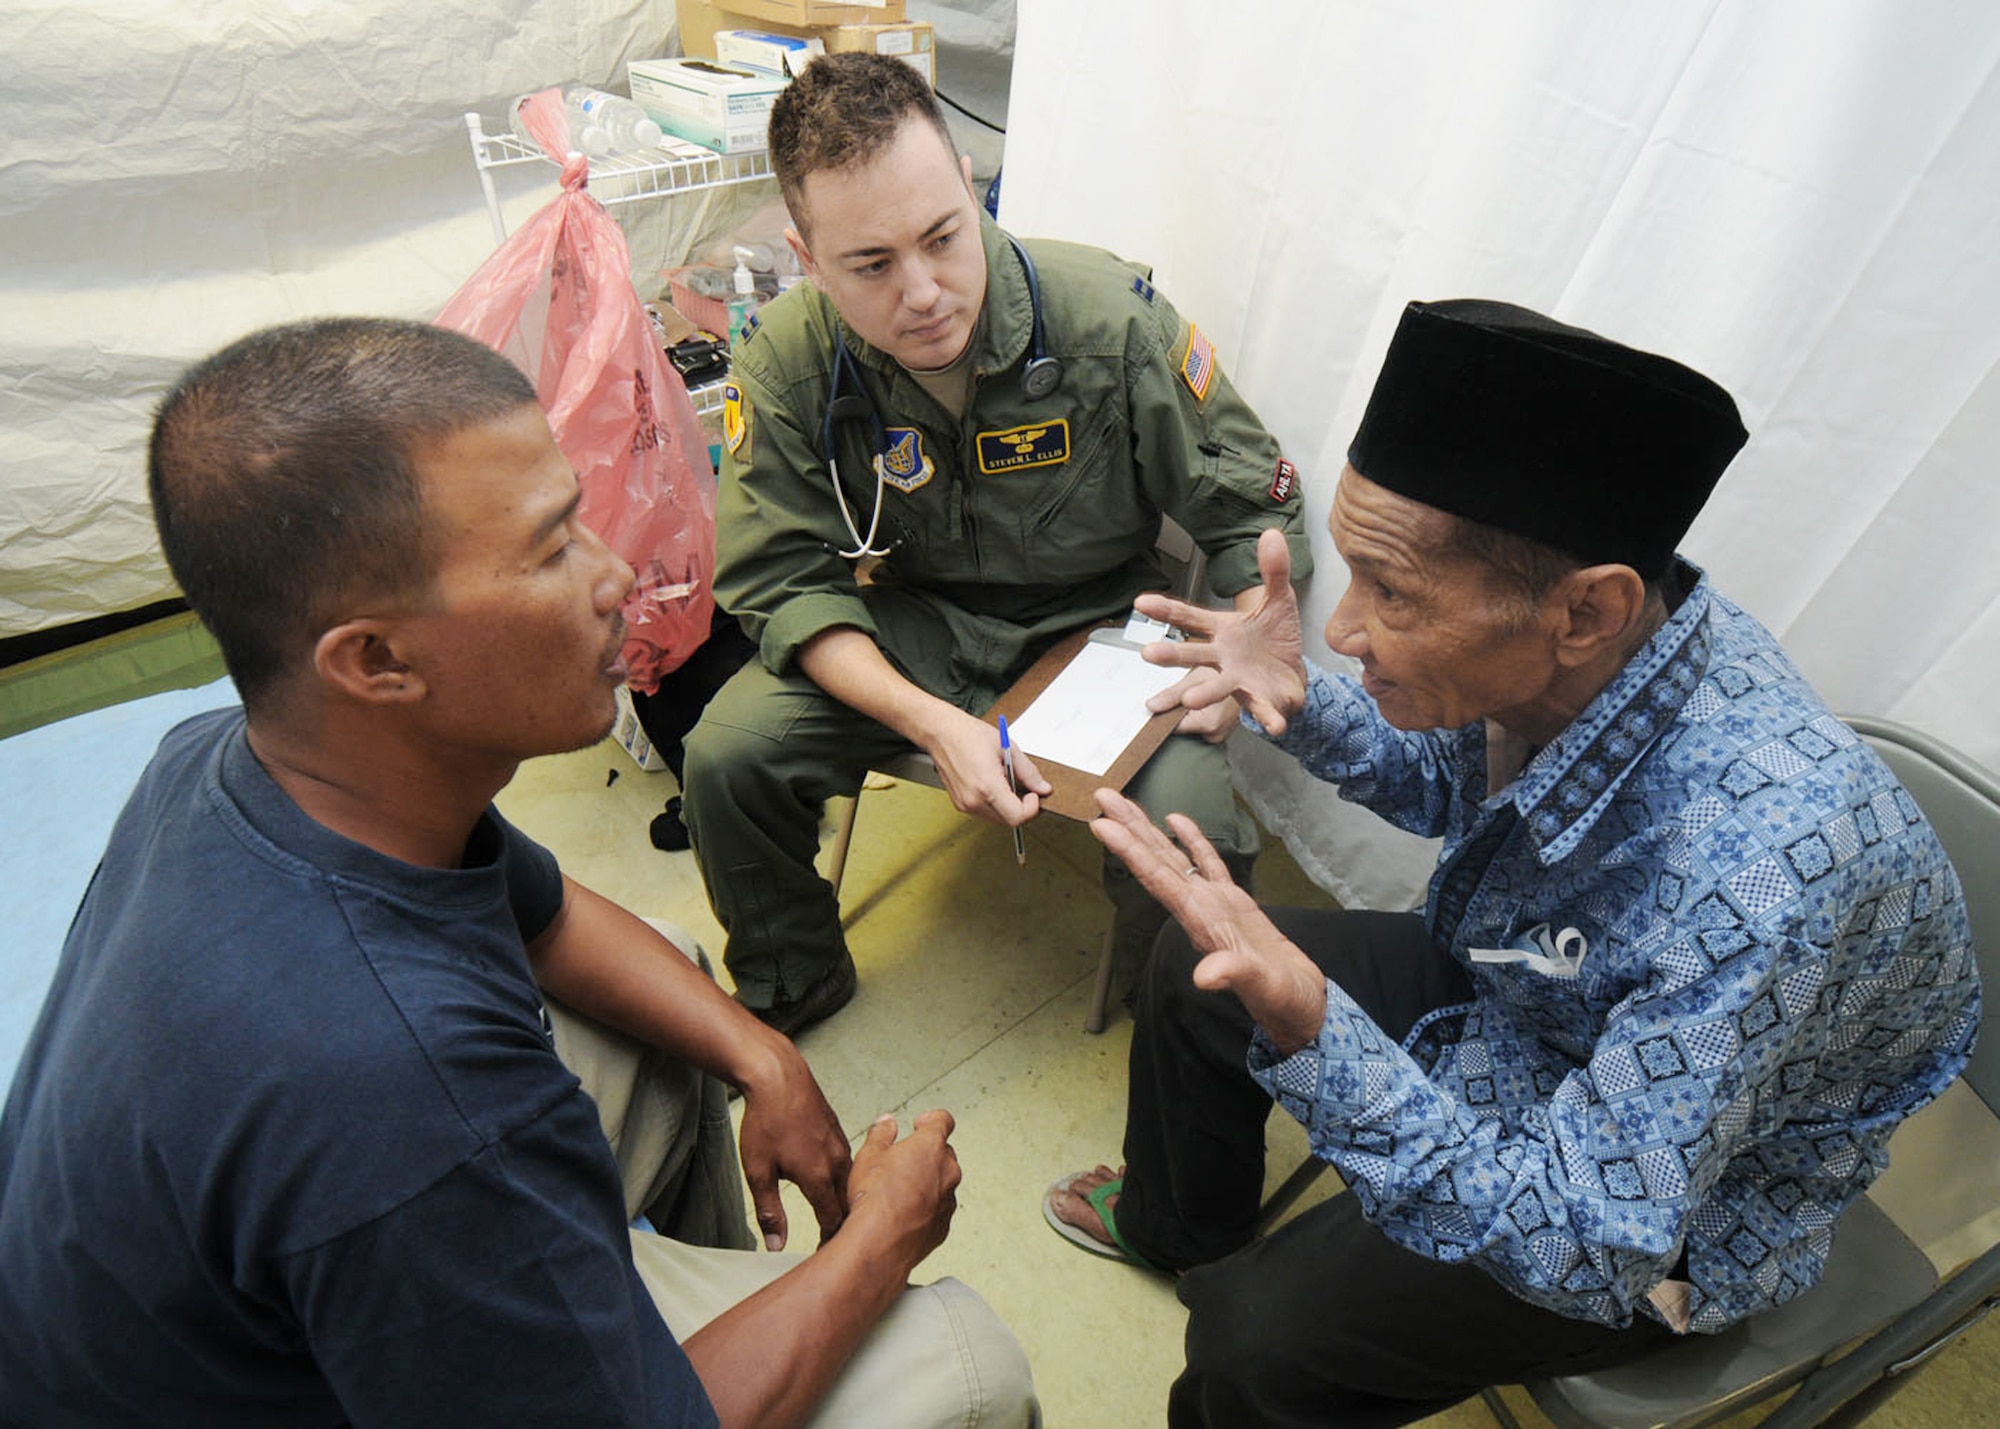 Capt. Steven Ellis collects medical history information from a patient with the help of Khairul, a local interpreter, Oct. 10, 2009, in Padang, Indonesia. Captain Ellis is a flight surgeon from the 36th Medical Group at Andersen Air Force Base, Guam, and is deployed here with an Air Force humanitarian assistance rapid response team to provide medical assistance to those affected by the recent earthquakes. (U.S. Air Force photo/Staff Sgt. Veronica Pierce) 